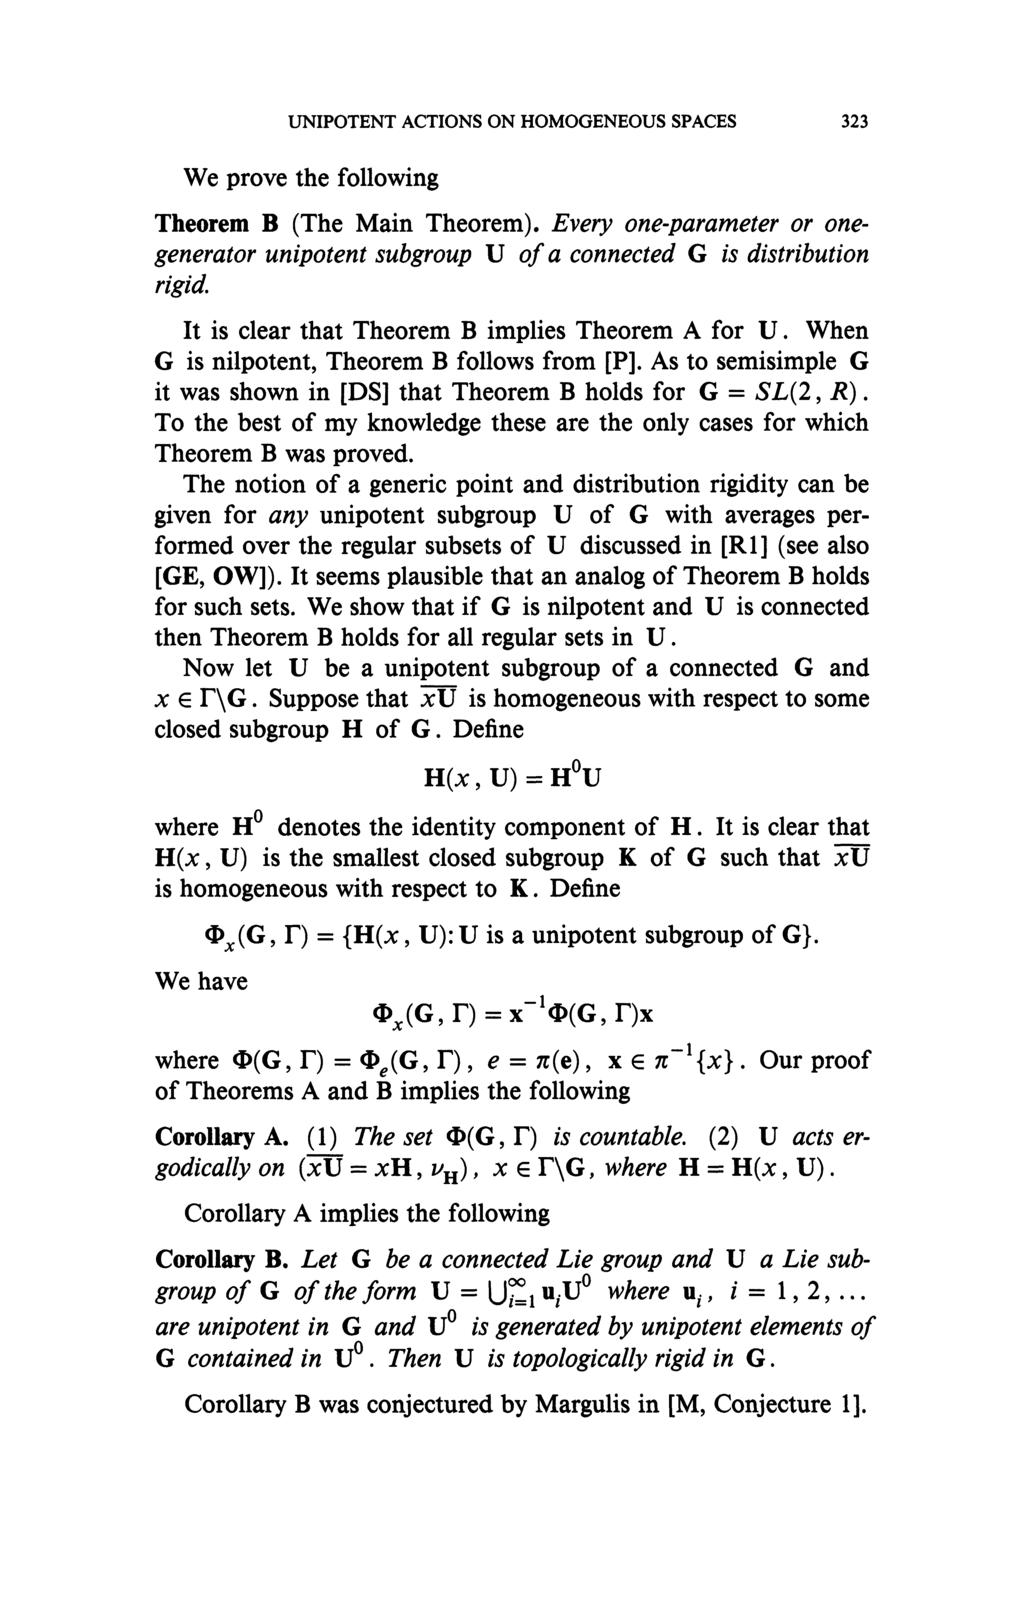 UNIPOTENT ACTIONS ON HOMOGENEOUS SPACES 323 We prove the following Theorem B (The Main Theorem). Every one-parameter or onegenerator unipotent subgroup Vofa connected G is distribution rigid.